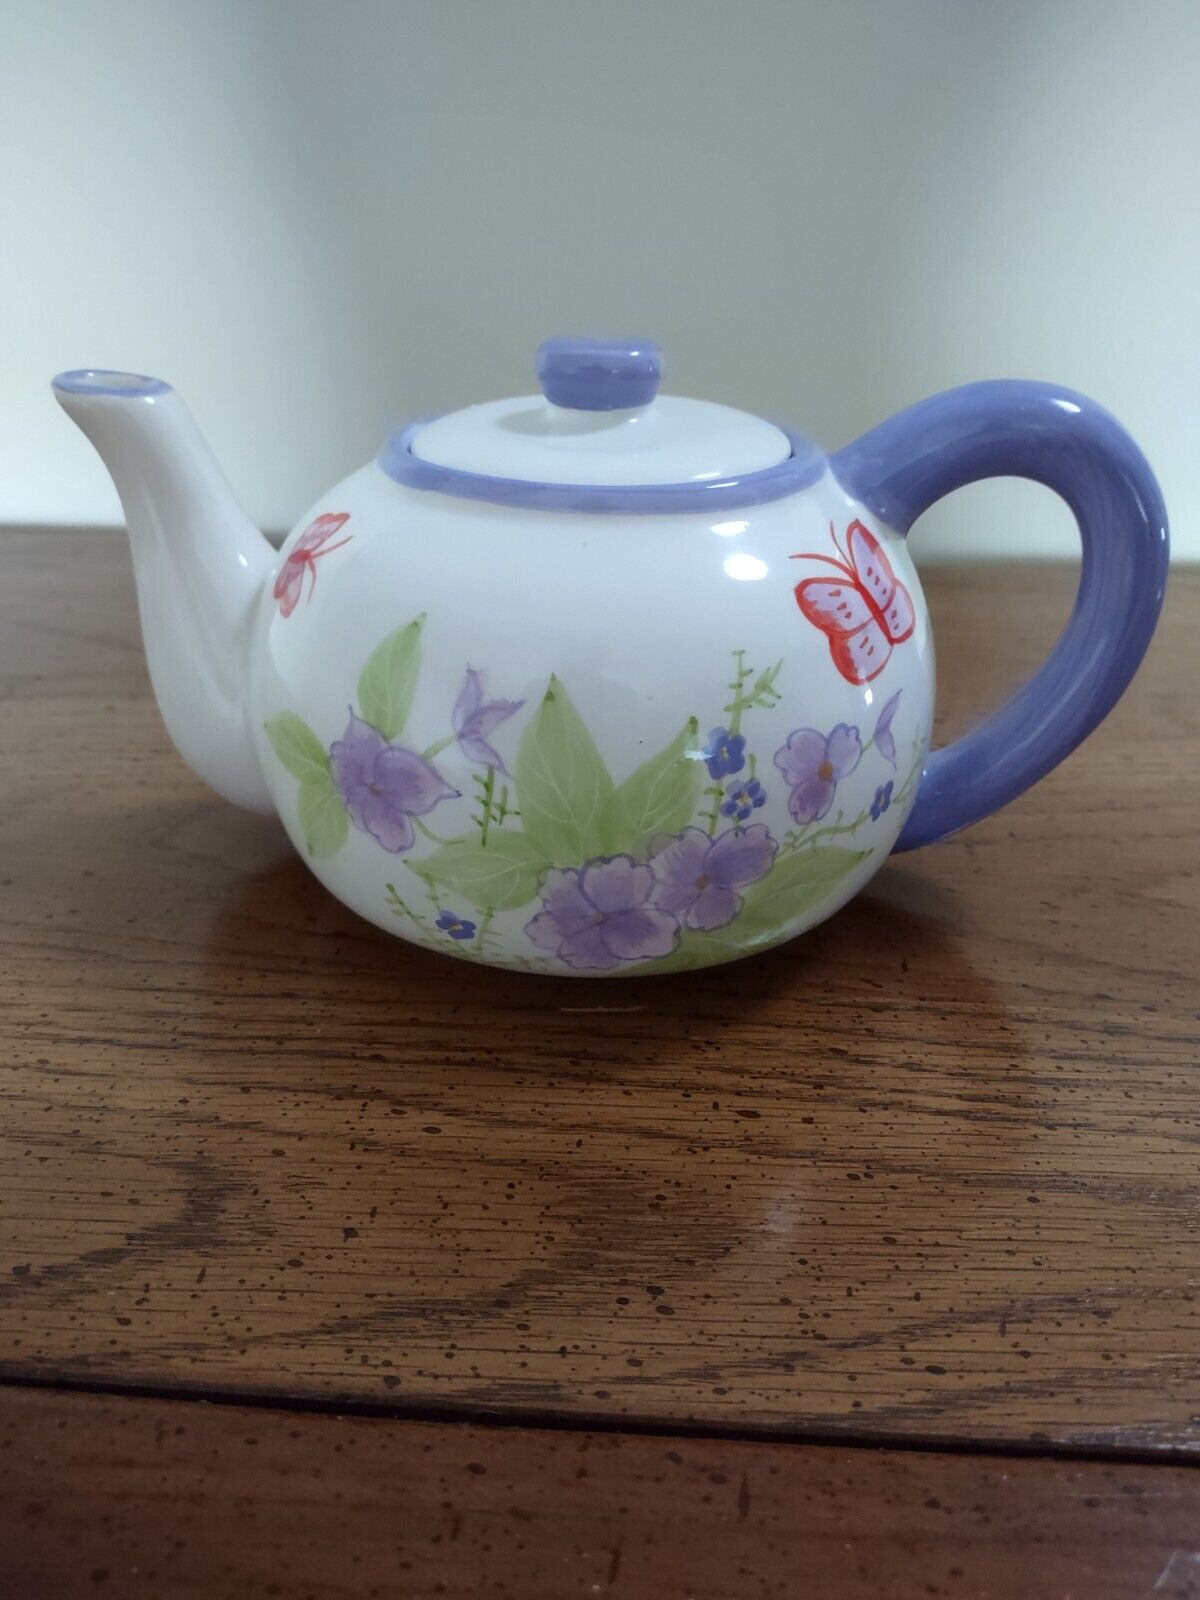 Beautiful ceramic teapot with purple flowers and butterflies